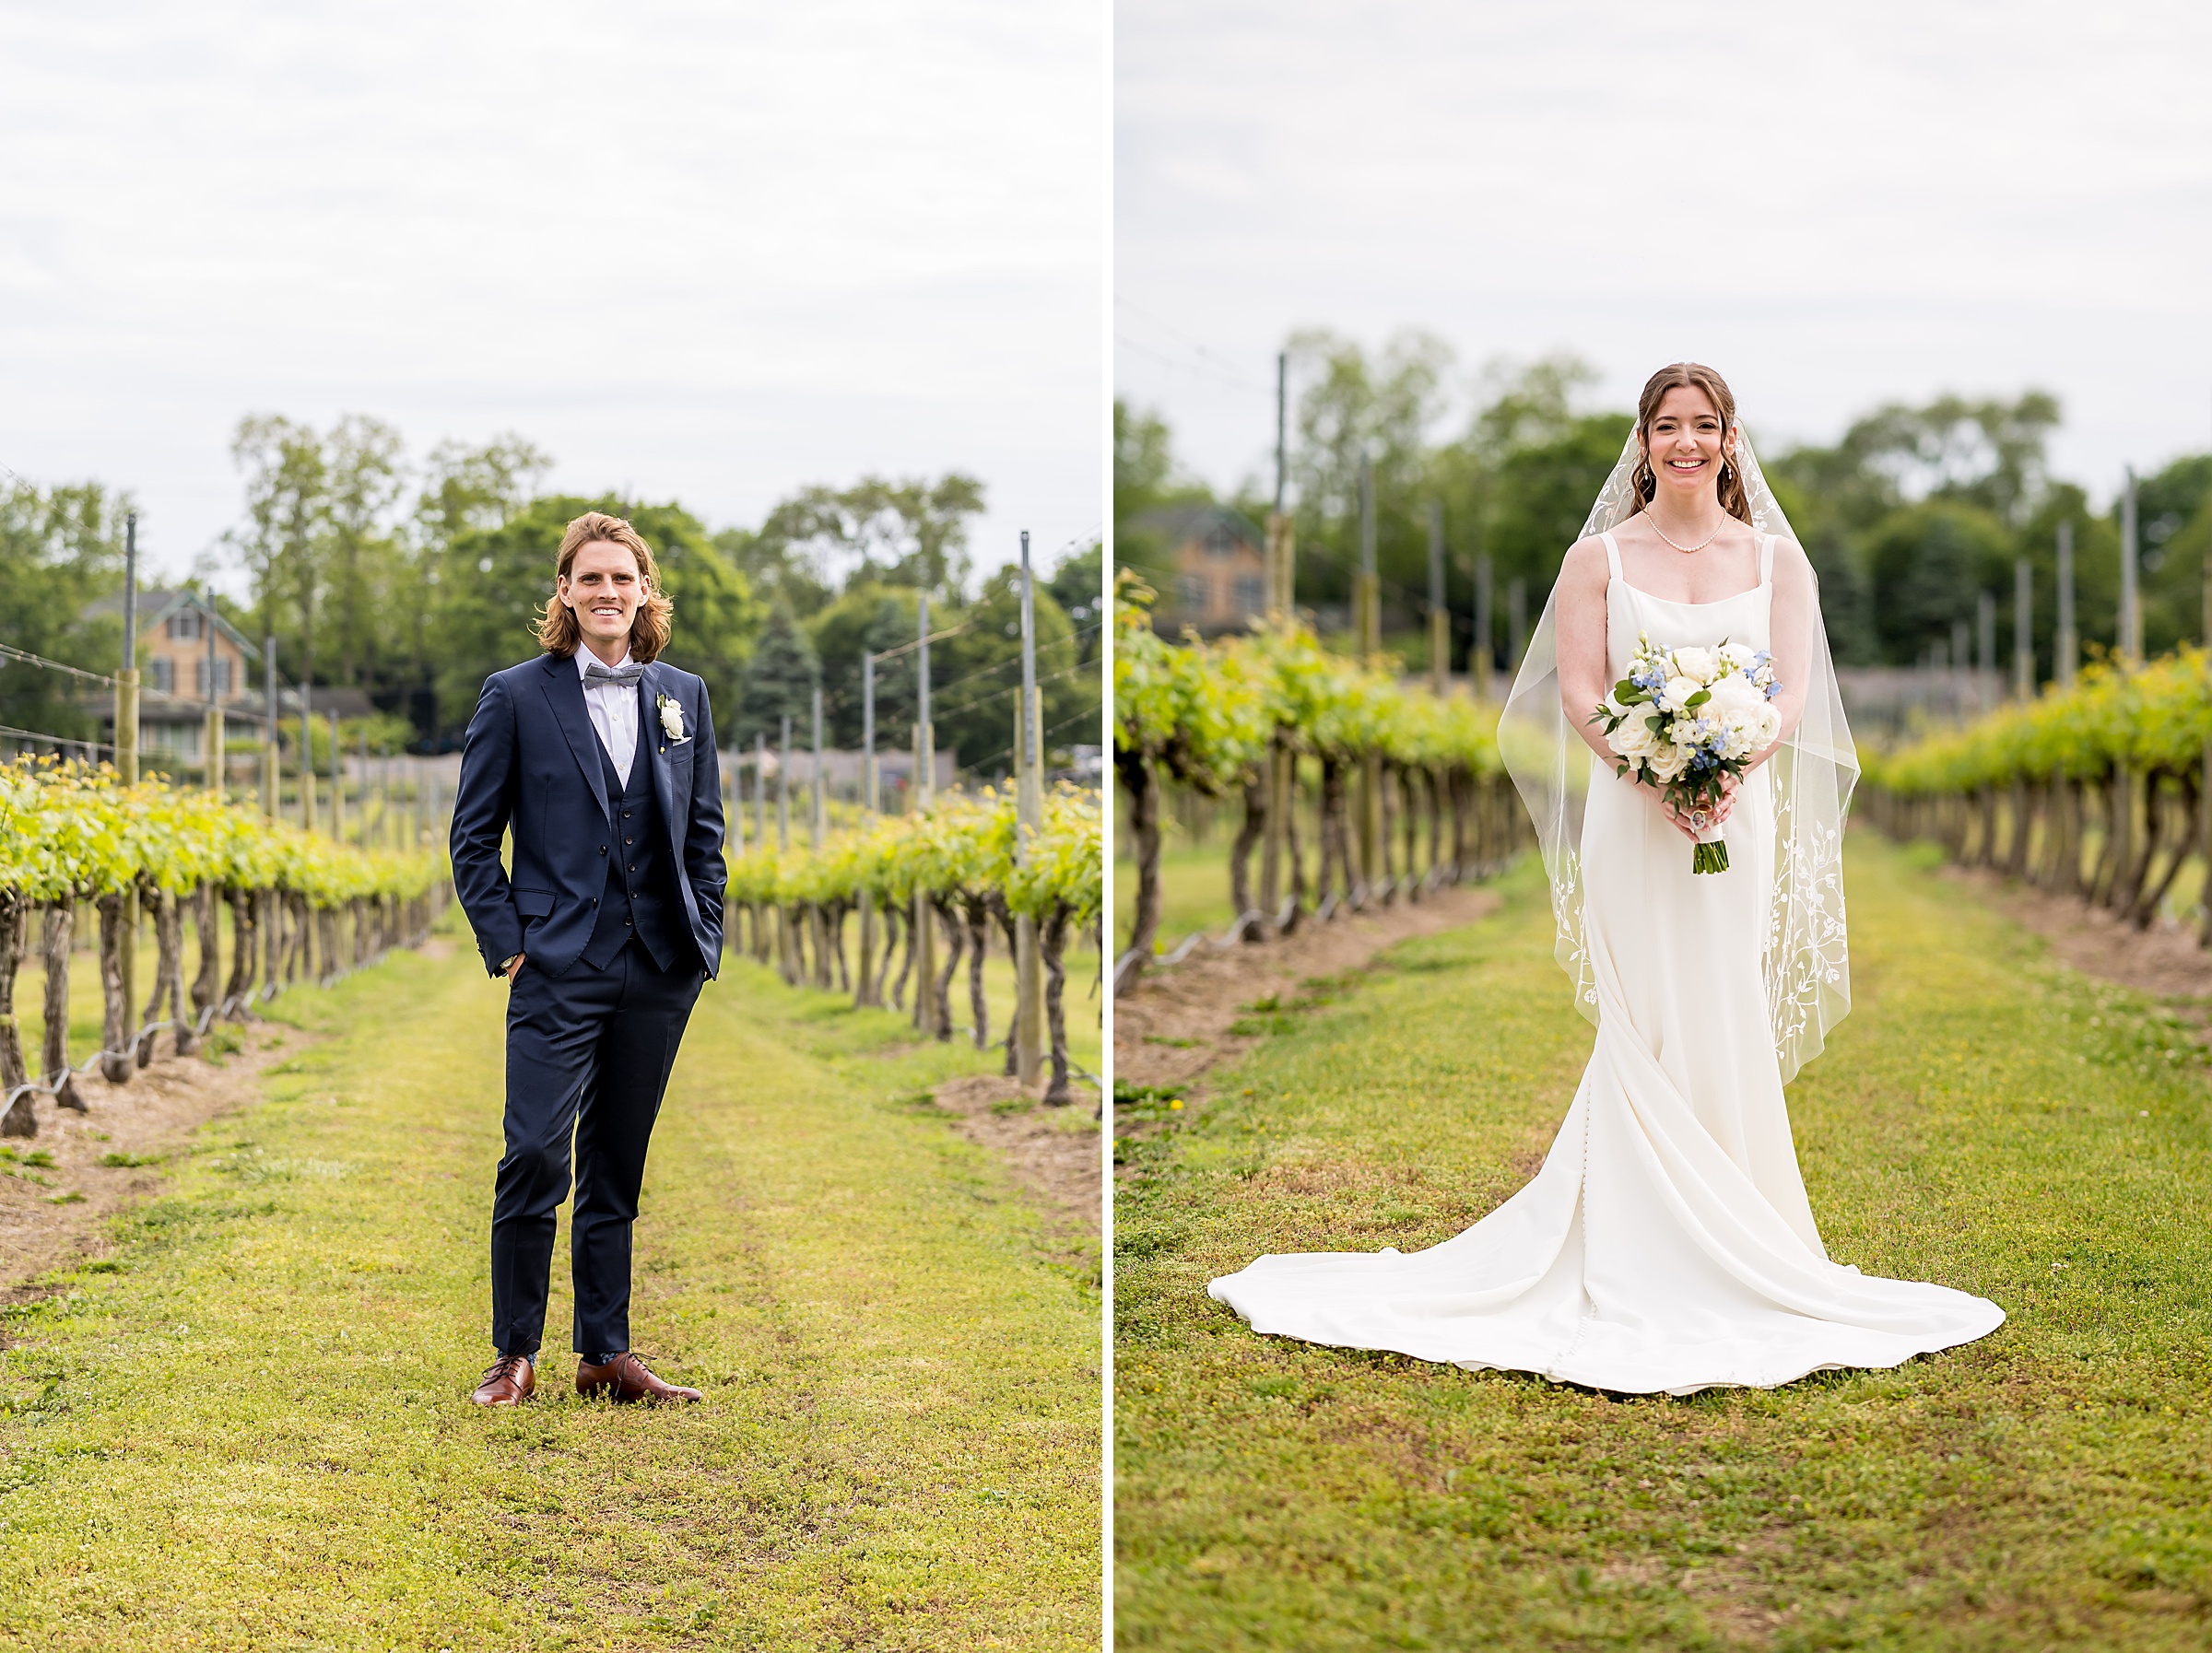 A man in a navy suit and a woman in a white wedding dress with a bouquet are standing separately in a vineyard.